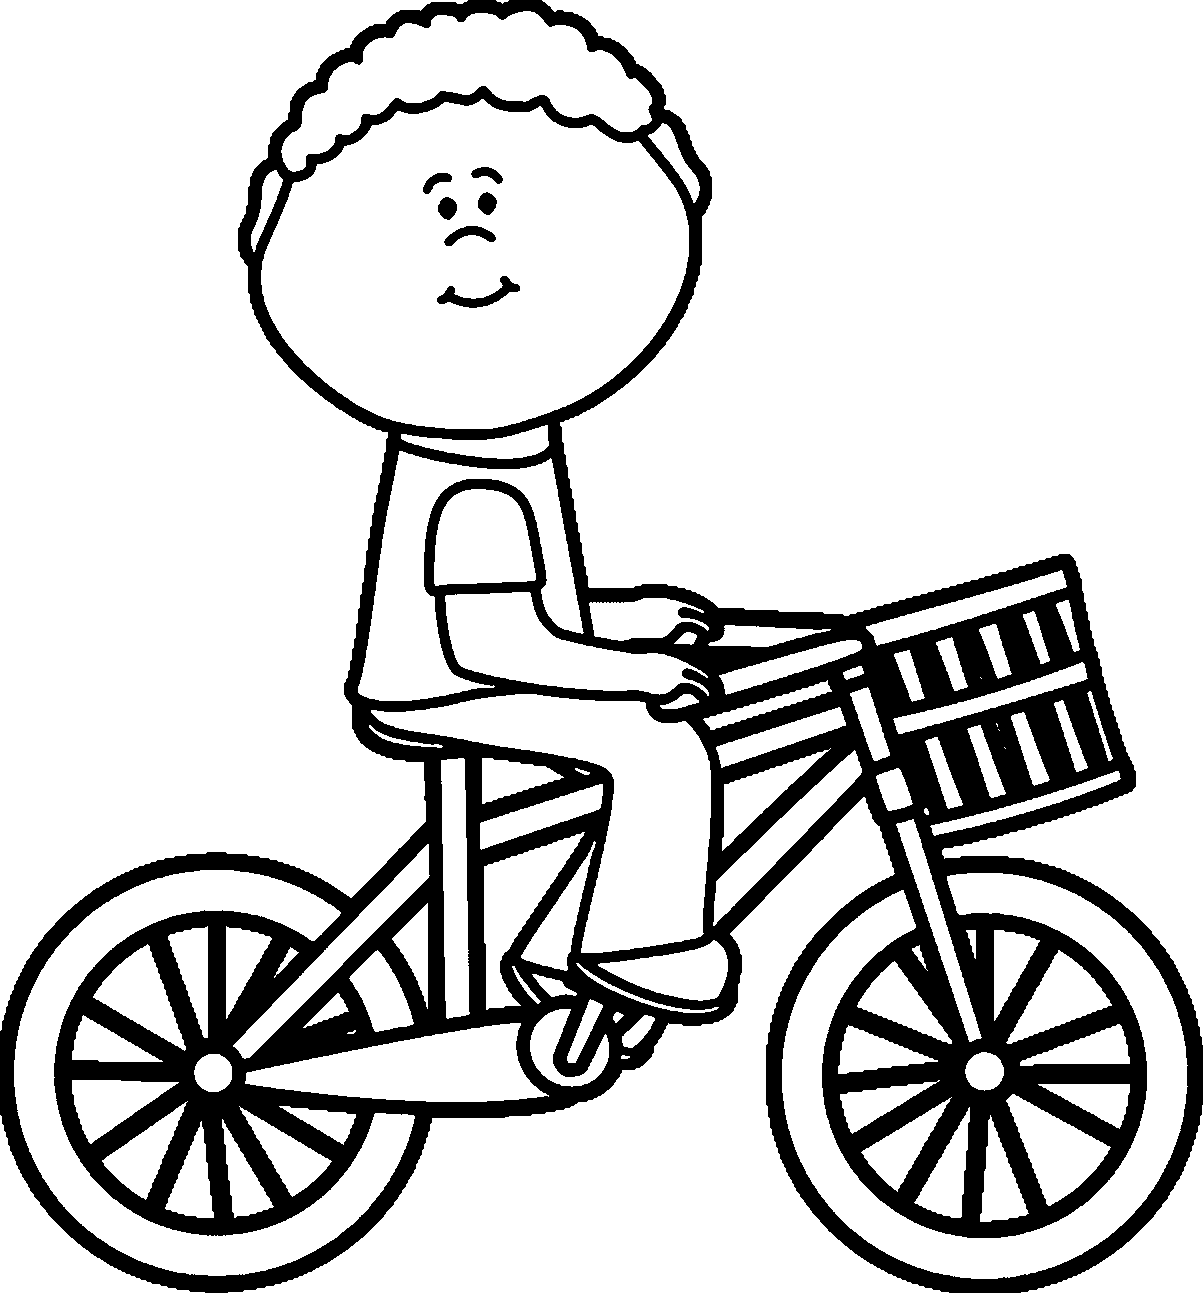 Boy Riding Bicycle With Basket Coloring Page